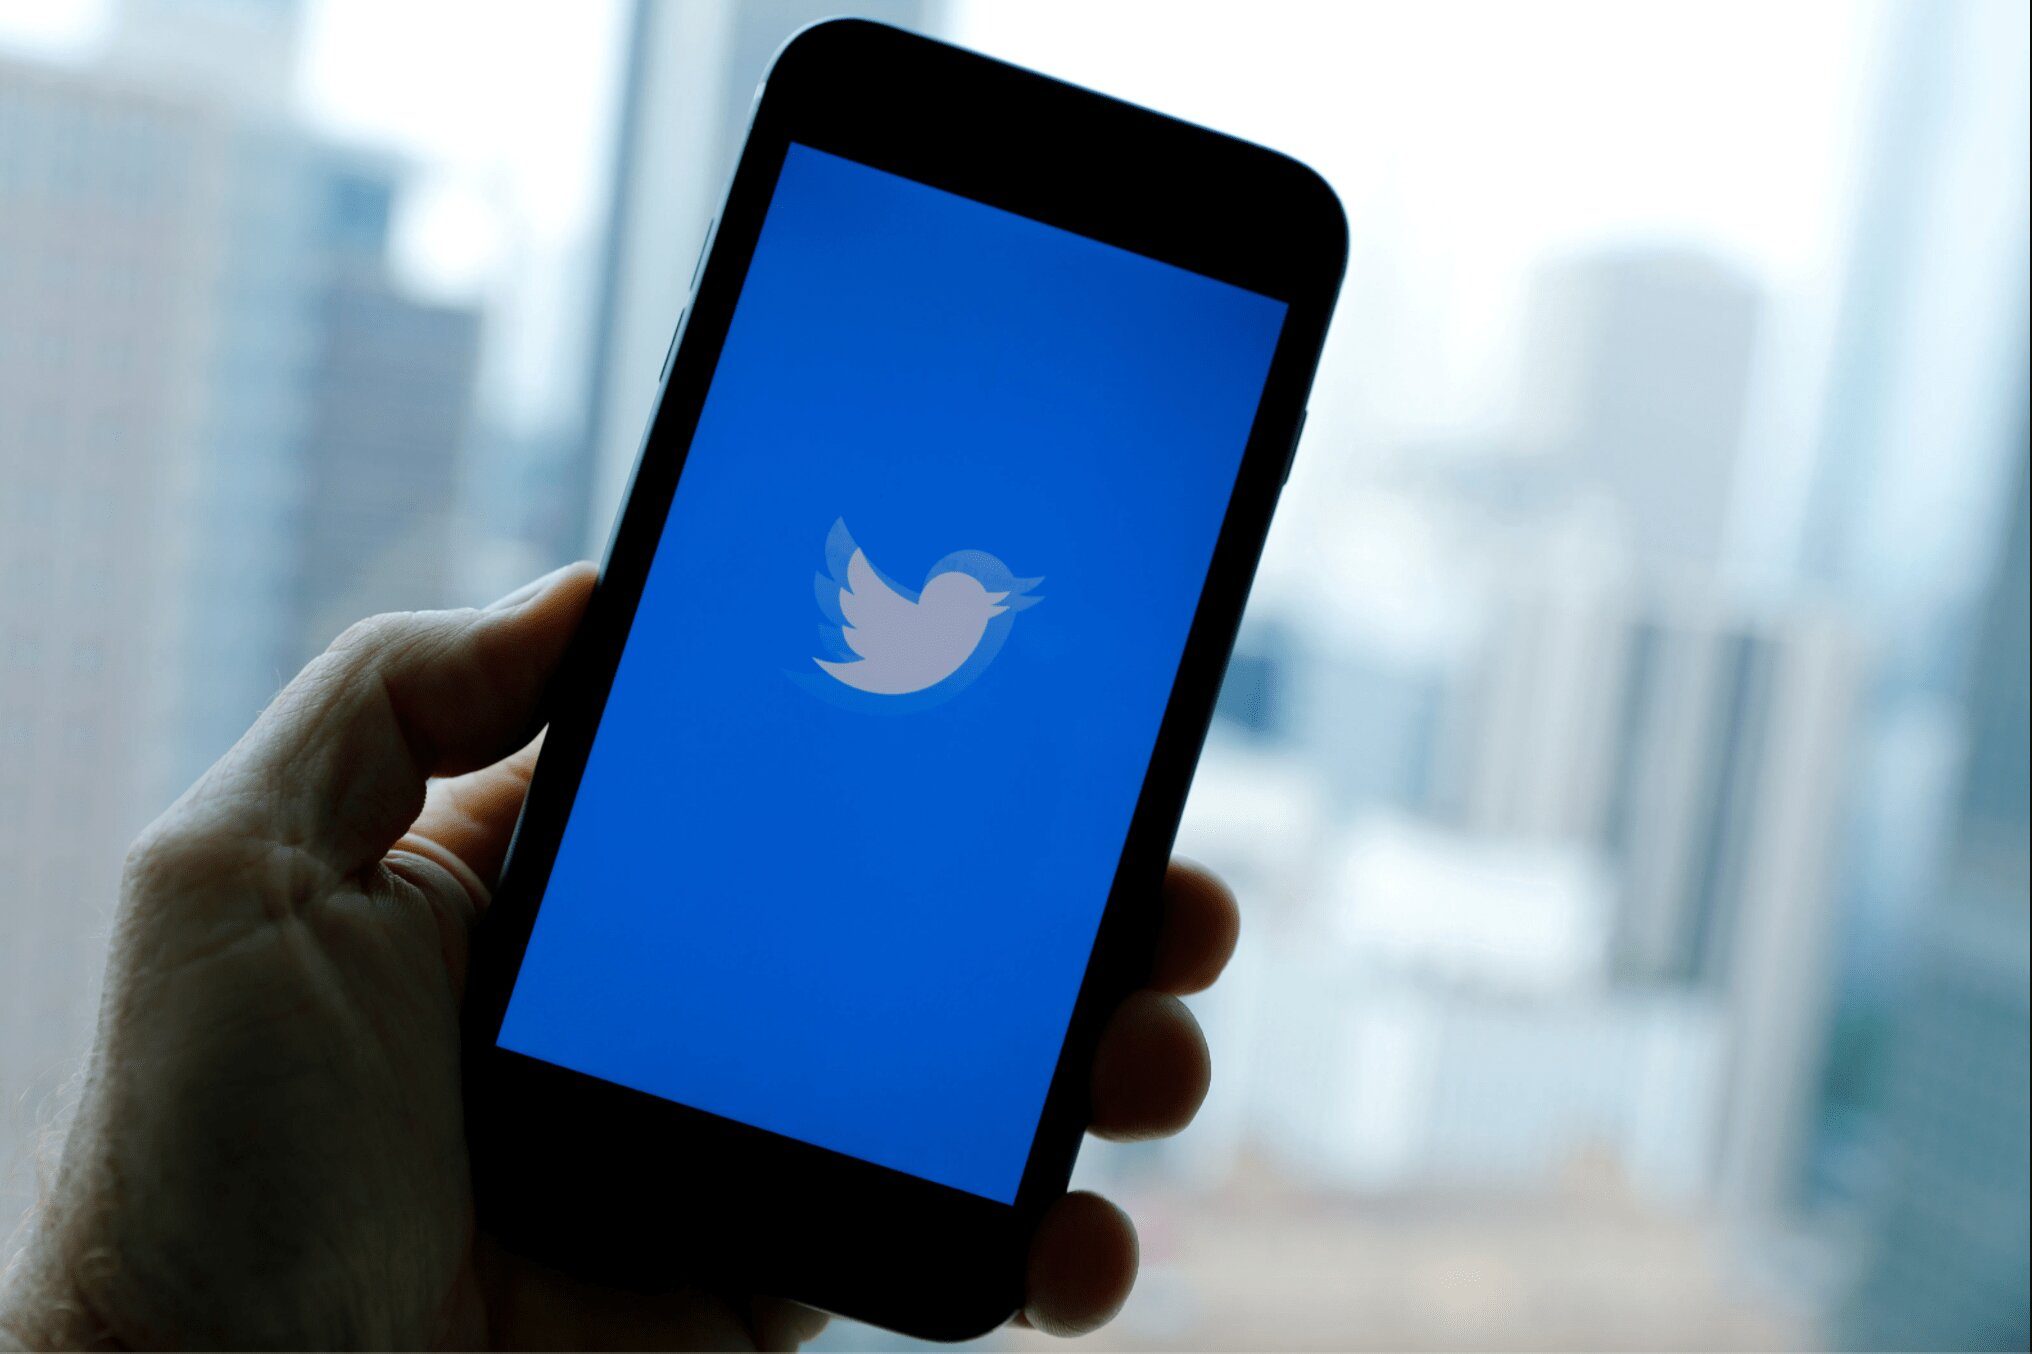 Twitter leads users with concerns on freedom of expression to relevant resources